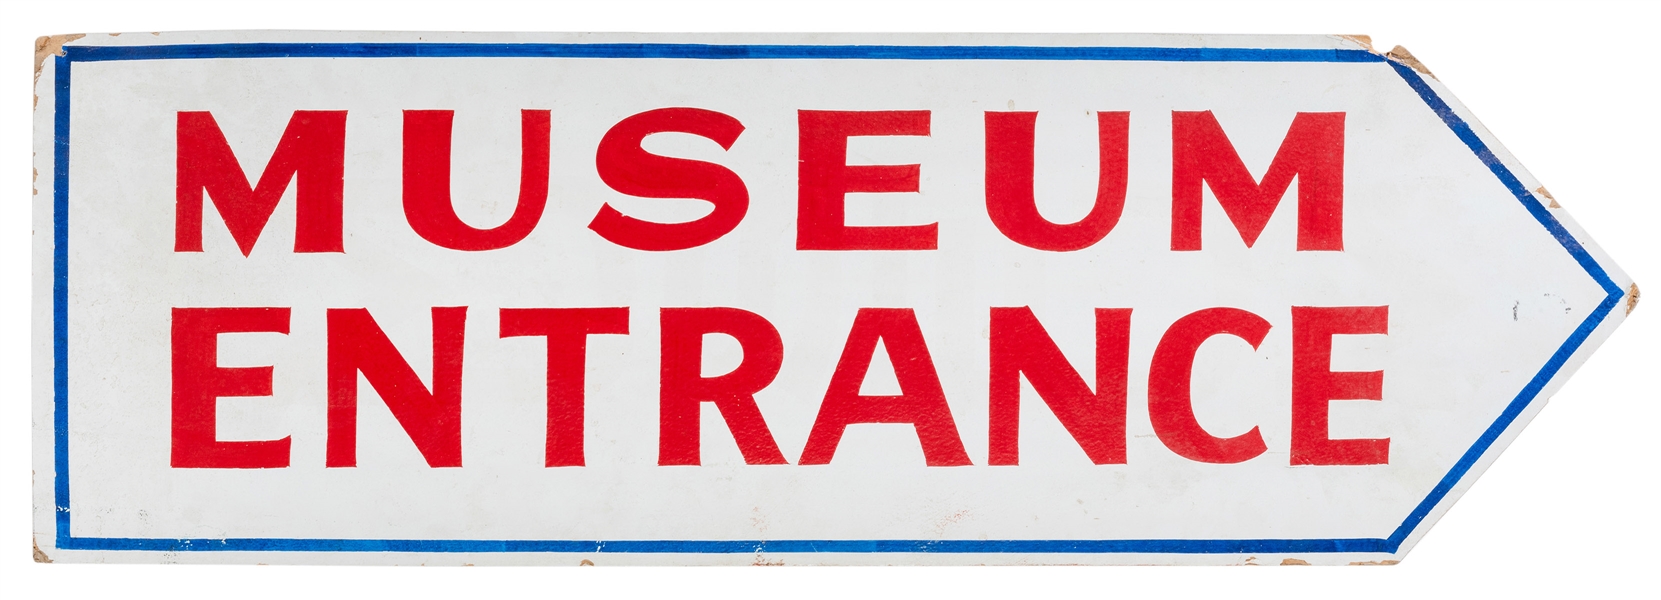 Museum Entrance Sign.